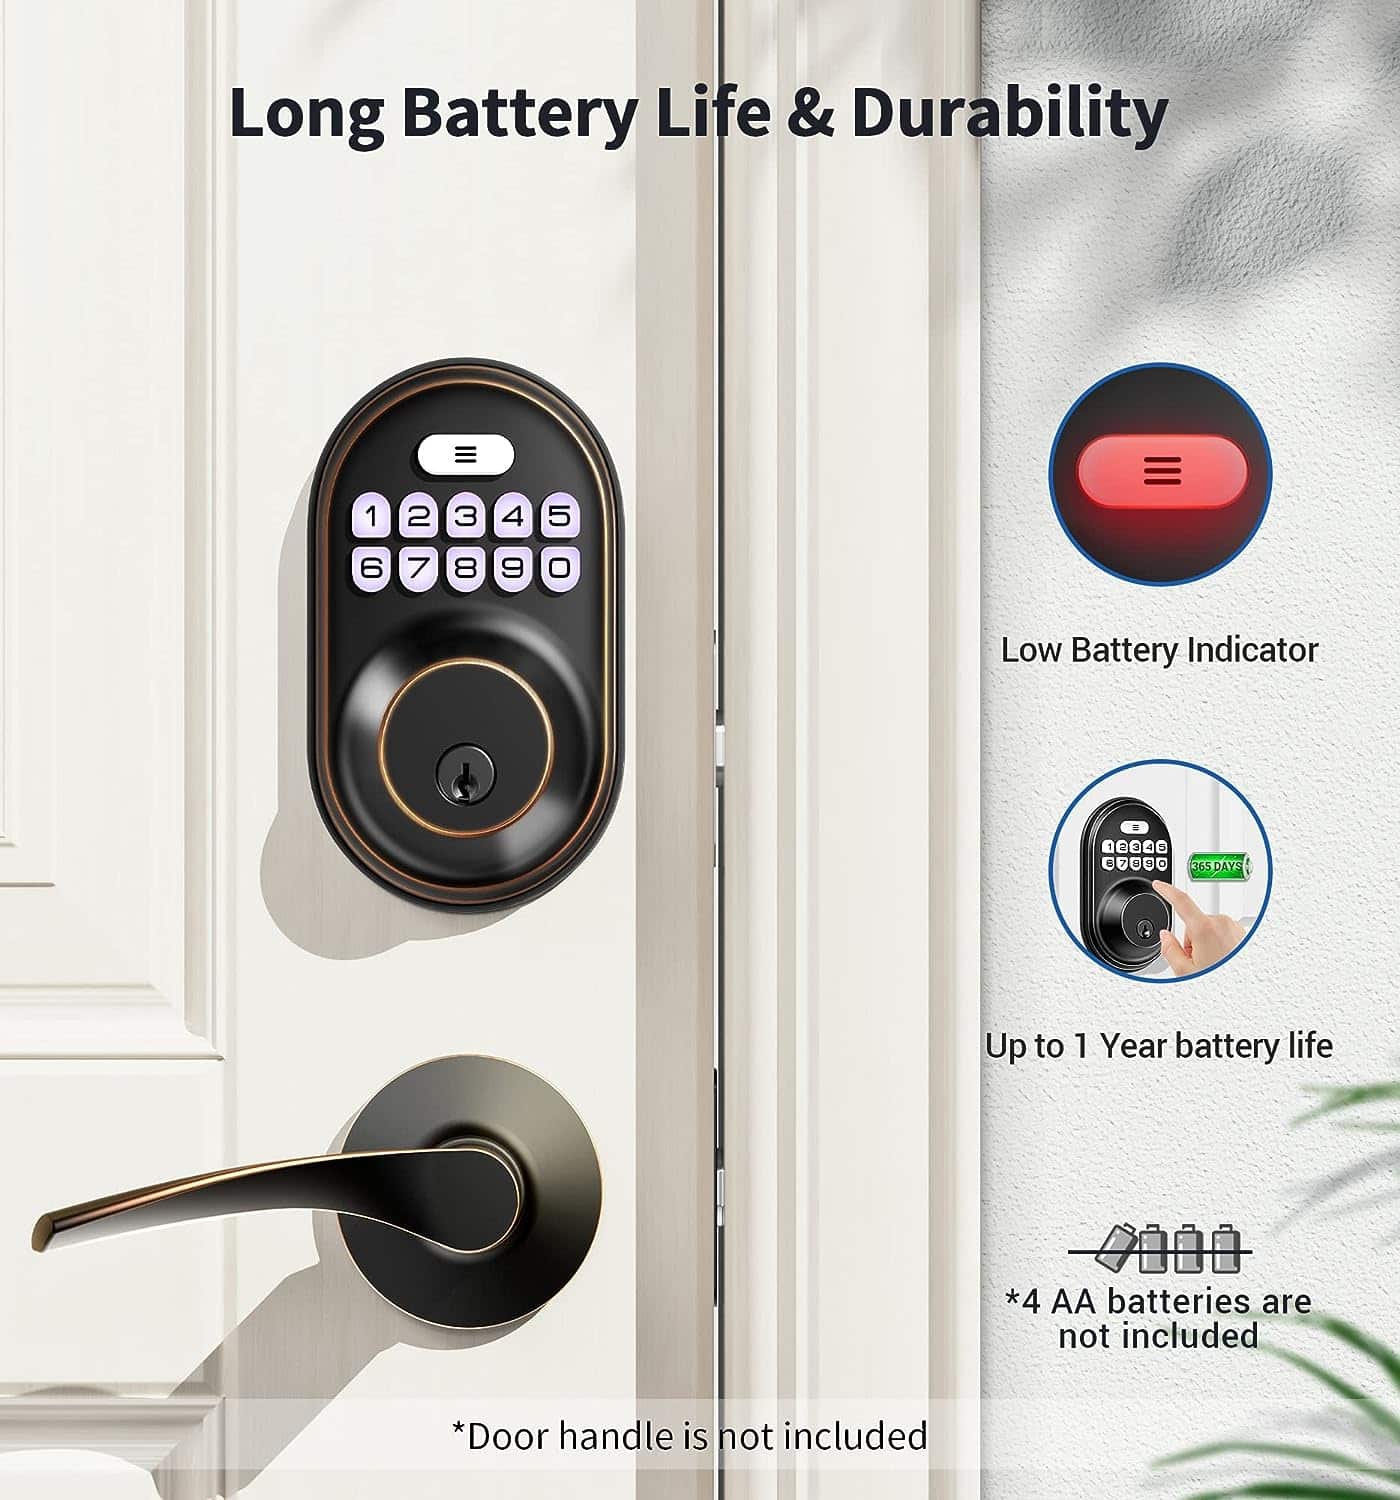 Veise Keyless Entry Door Lock Review: The Perfect Blend of Security and Convenience